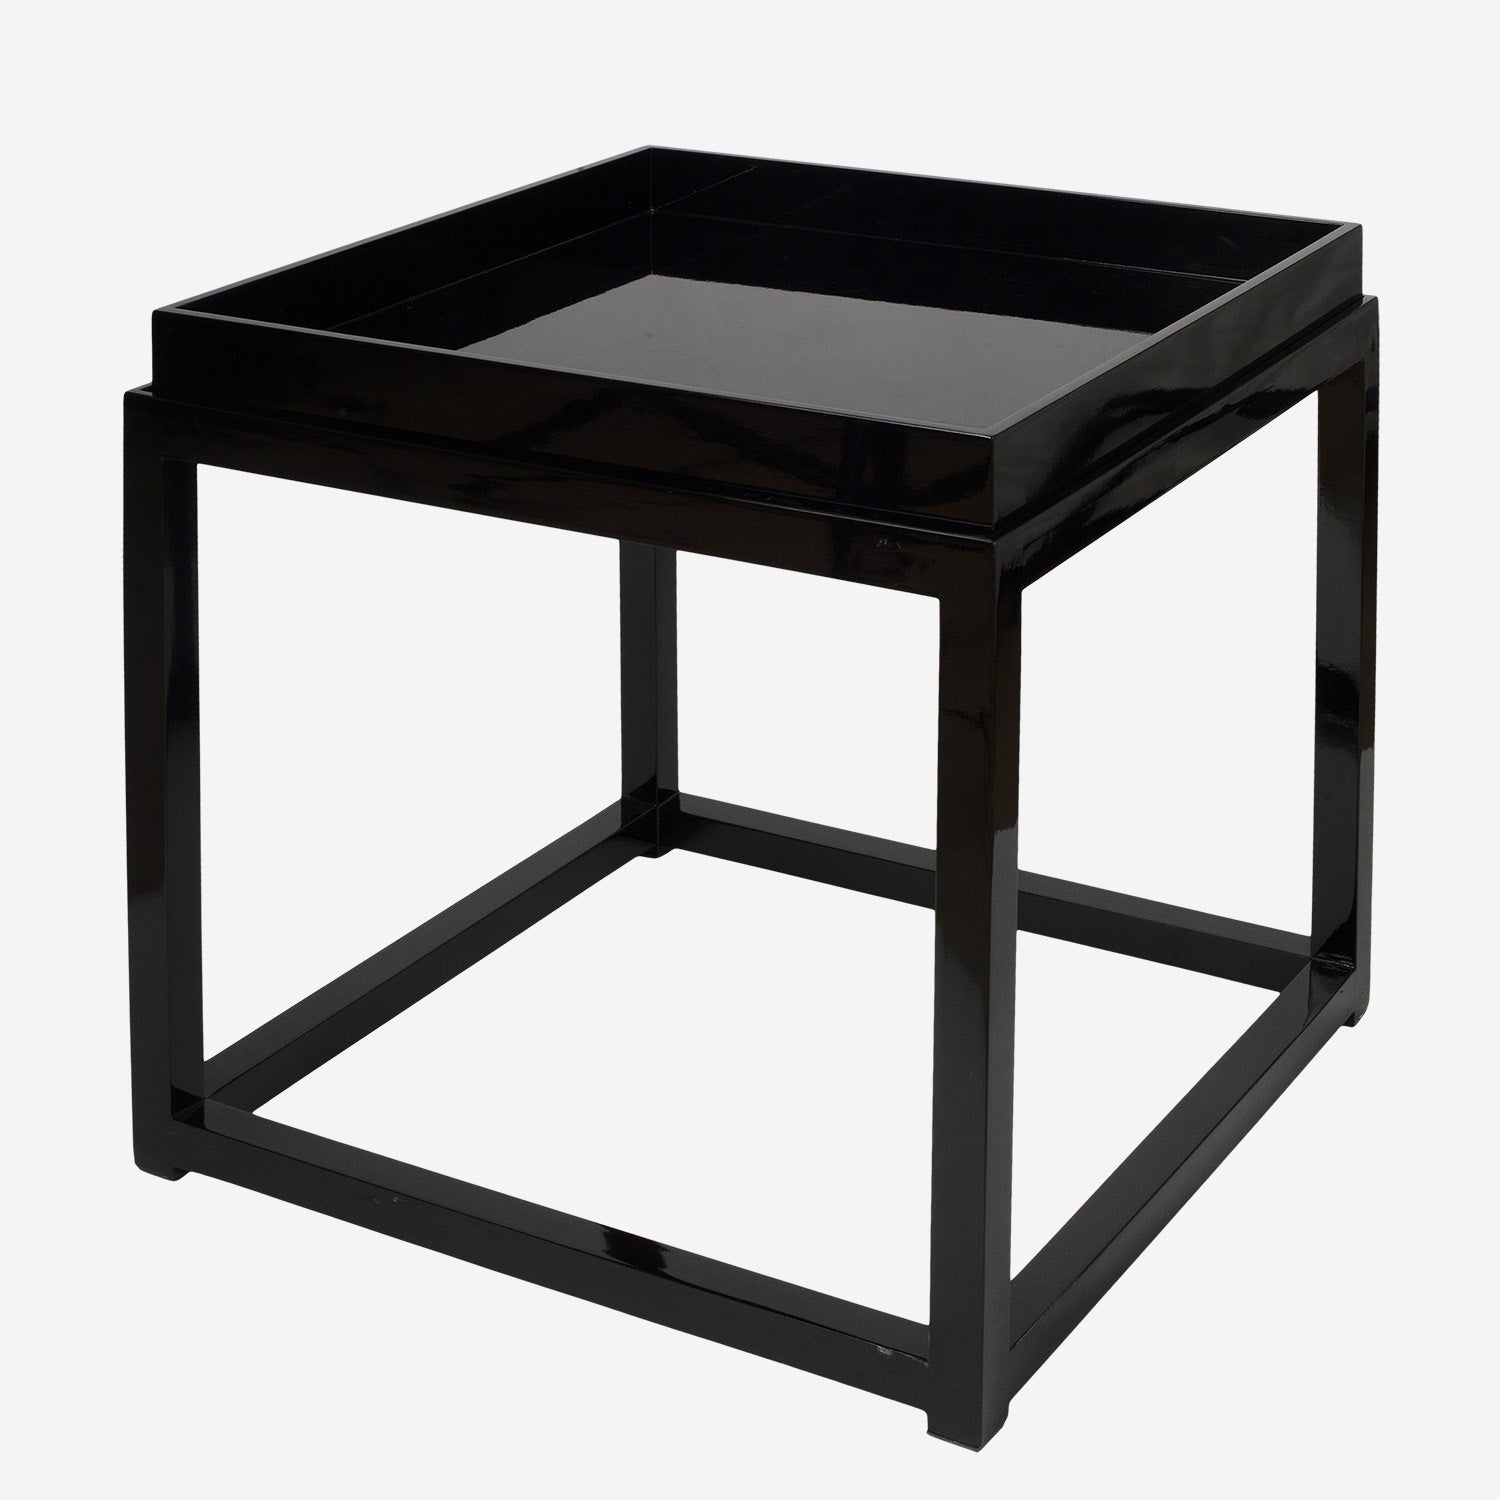 Lacquer table with Tray Black